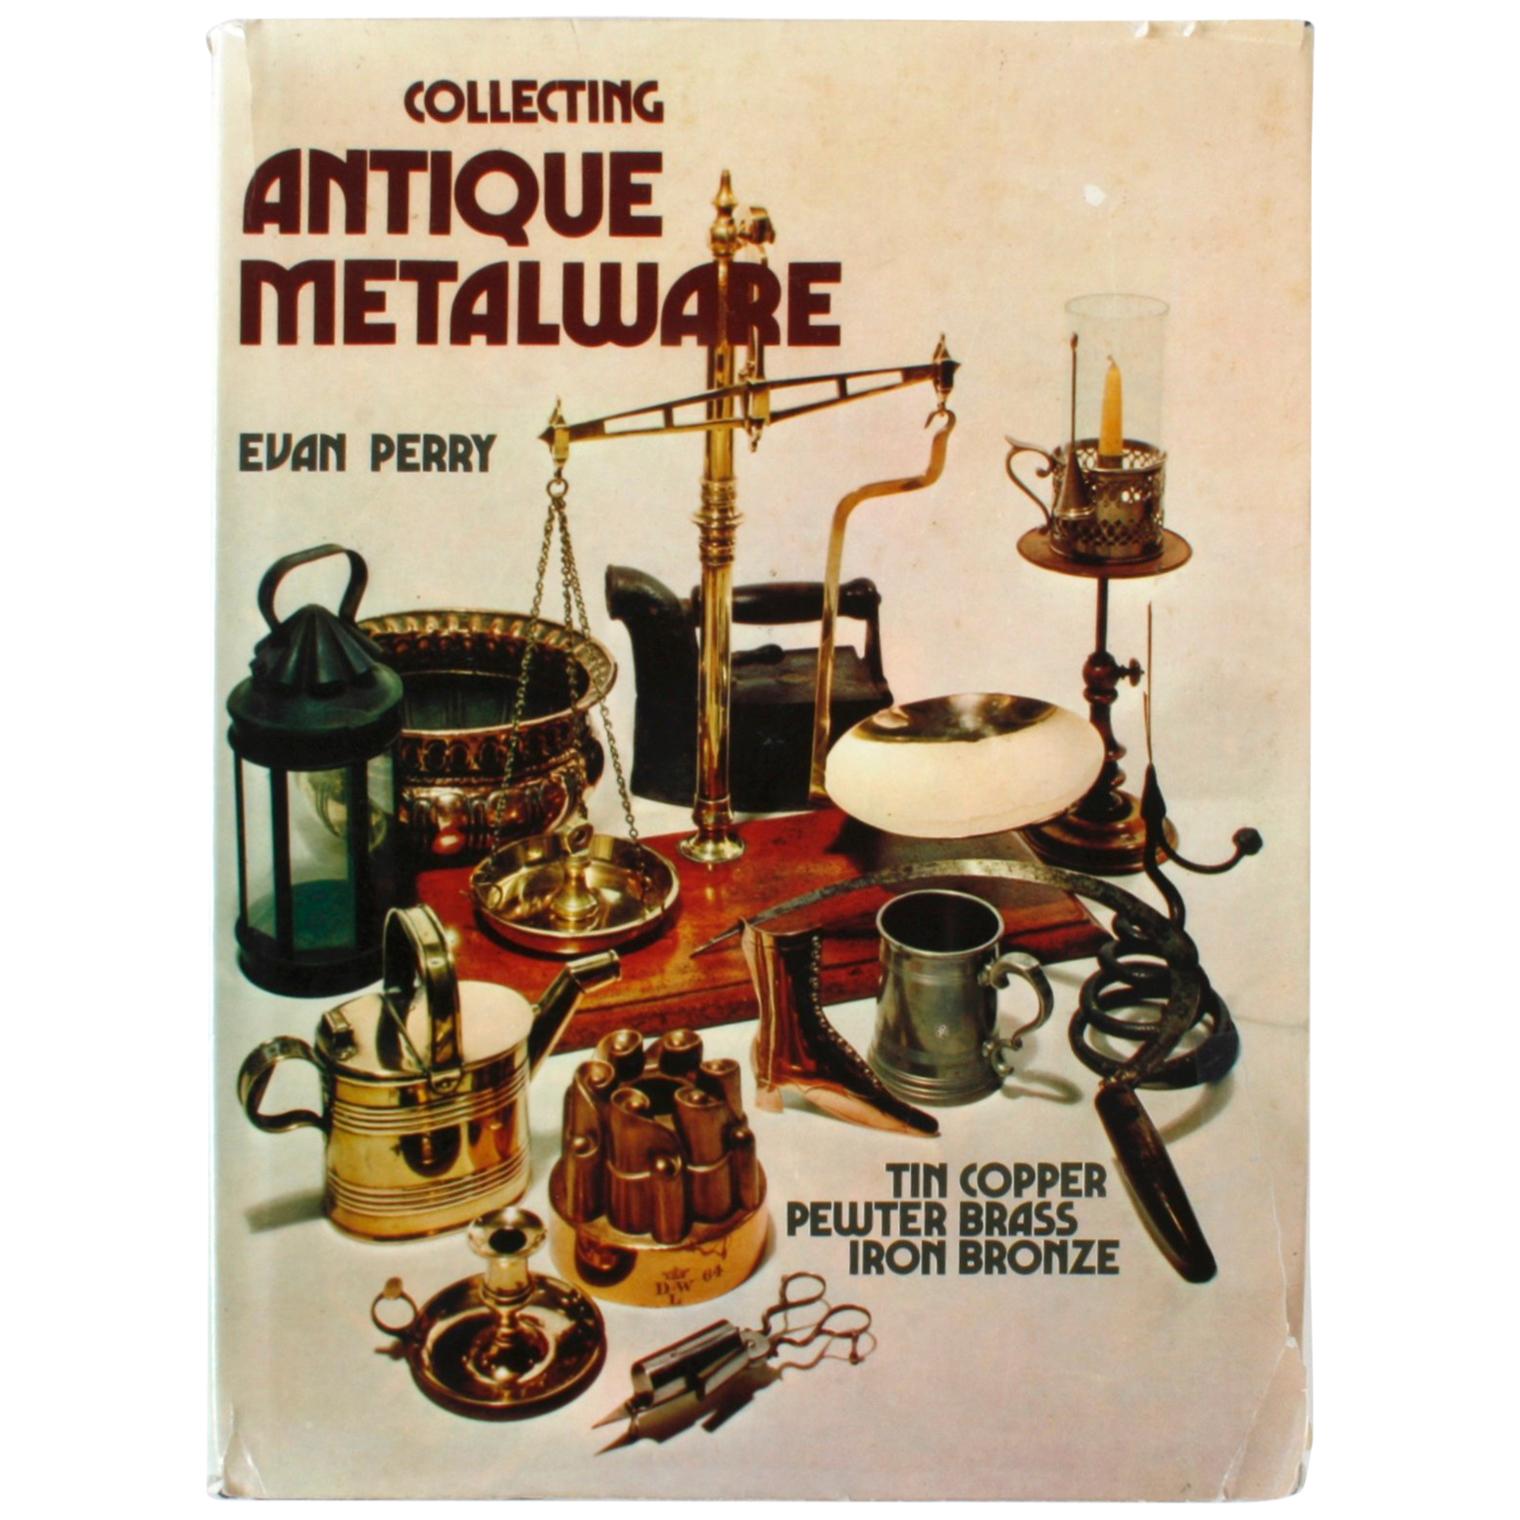 Collecting Antique Metalware by Evan Perry